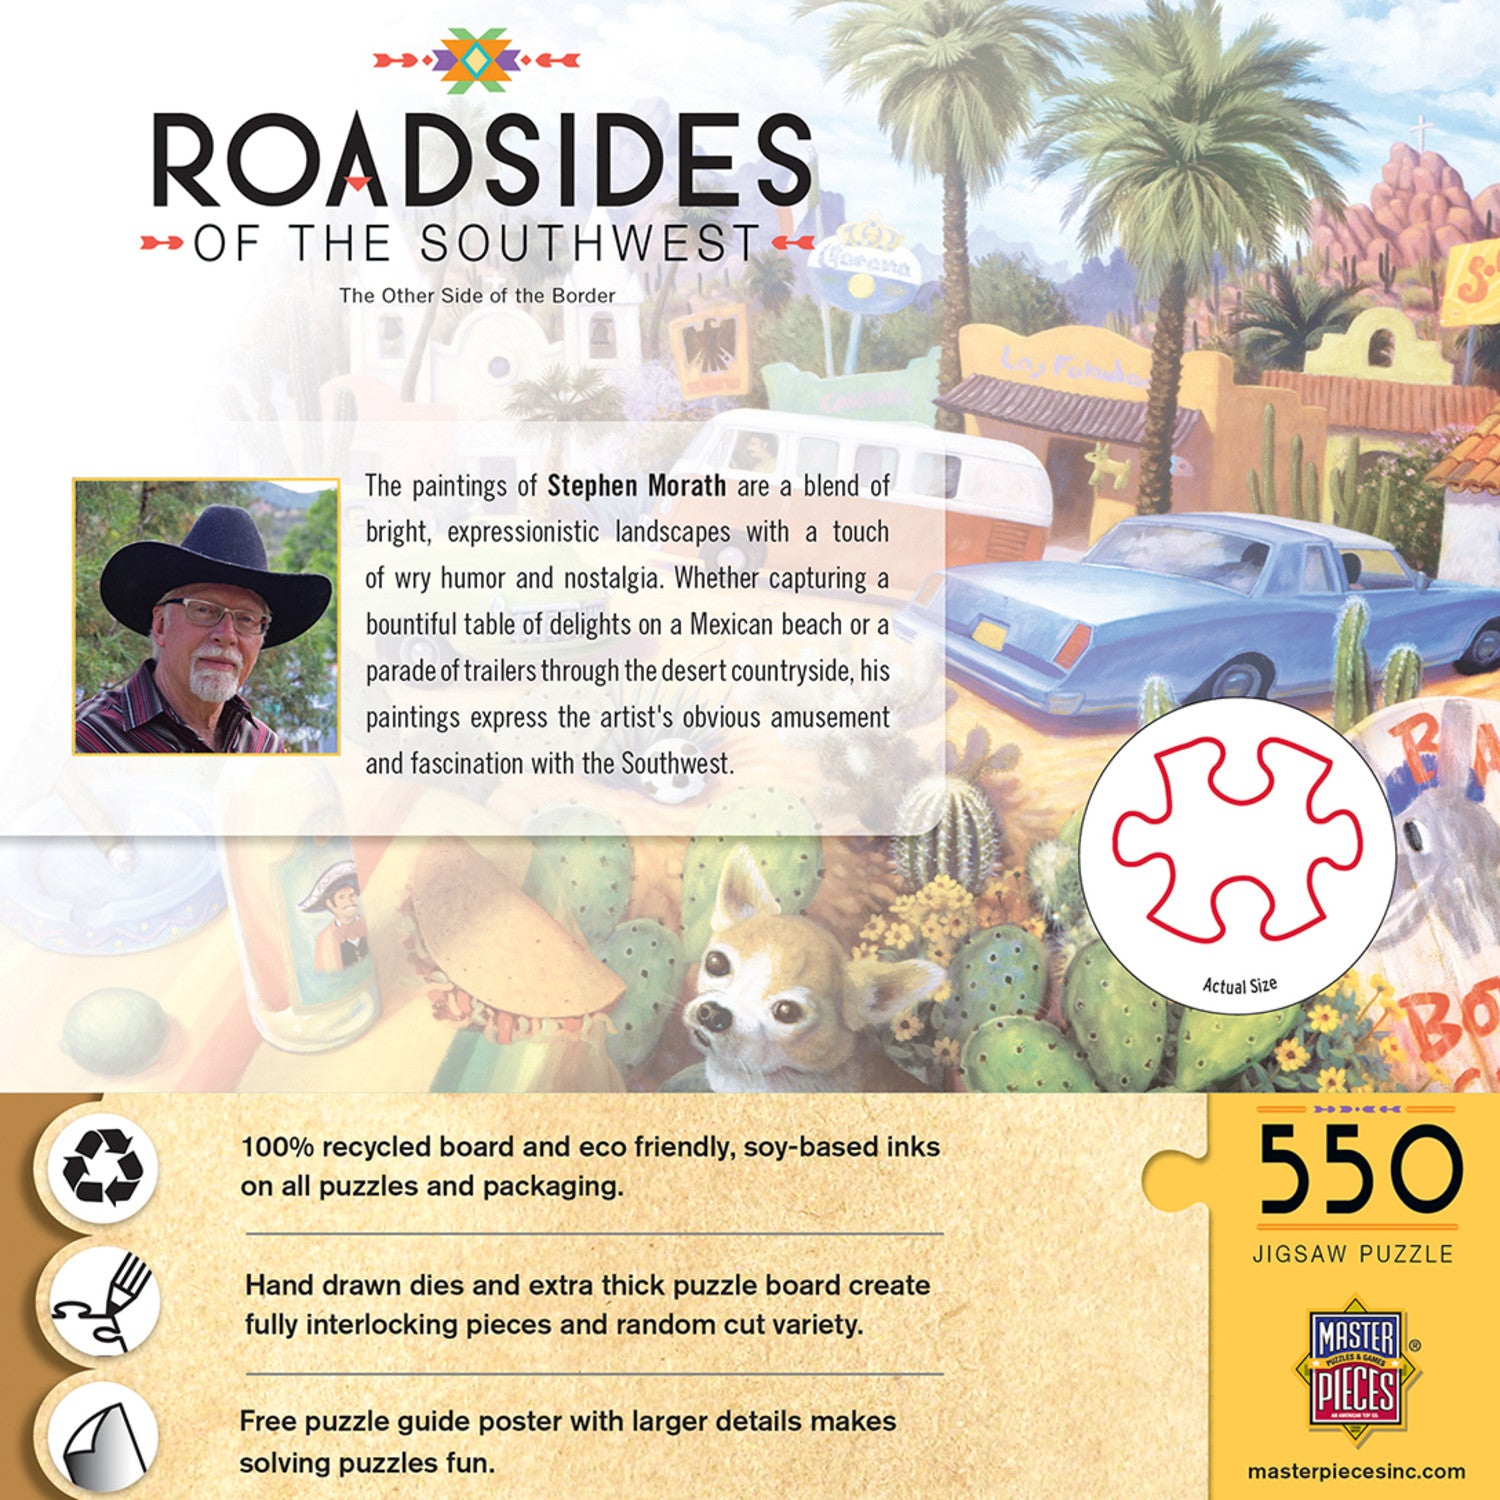 Roadsides of the Southwest - Other Side of the Border 550 Piece Puzzle